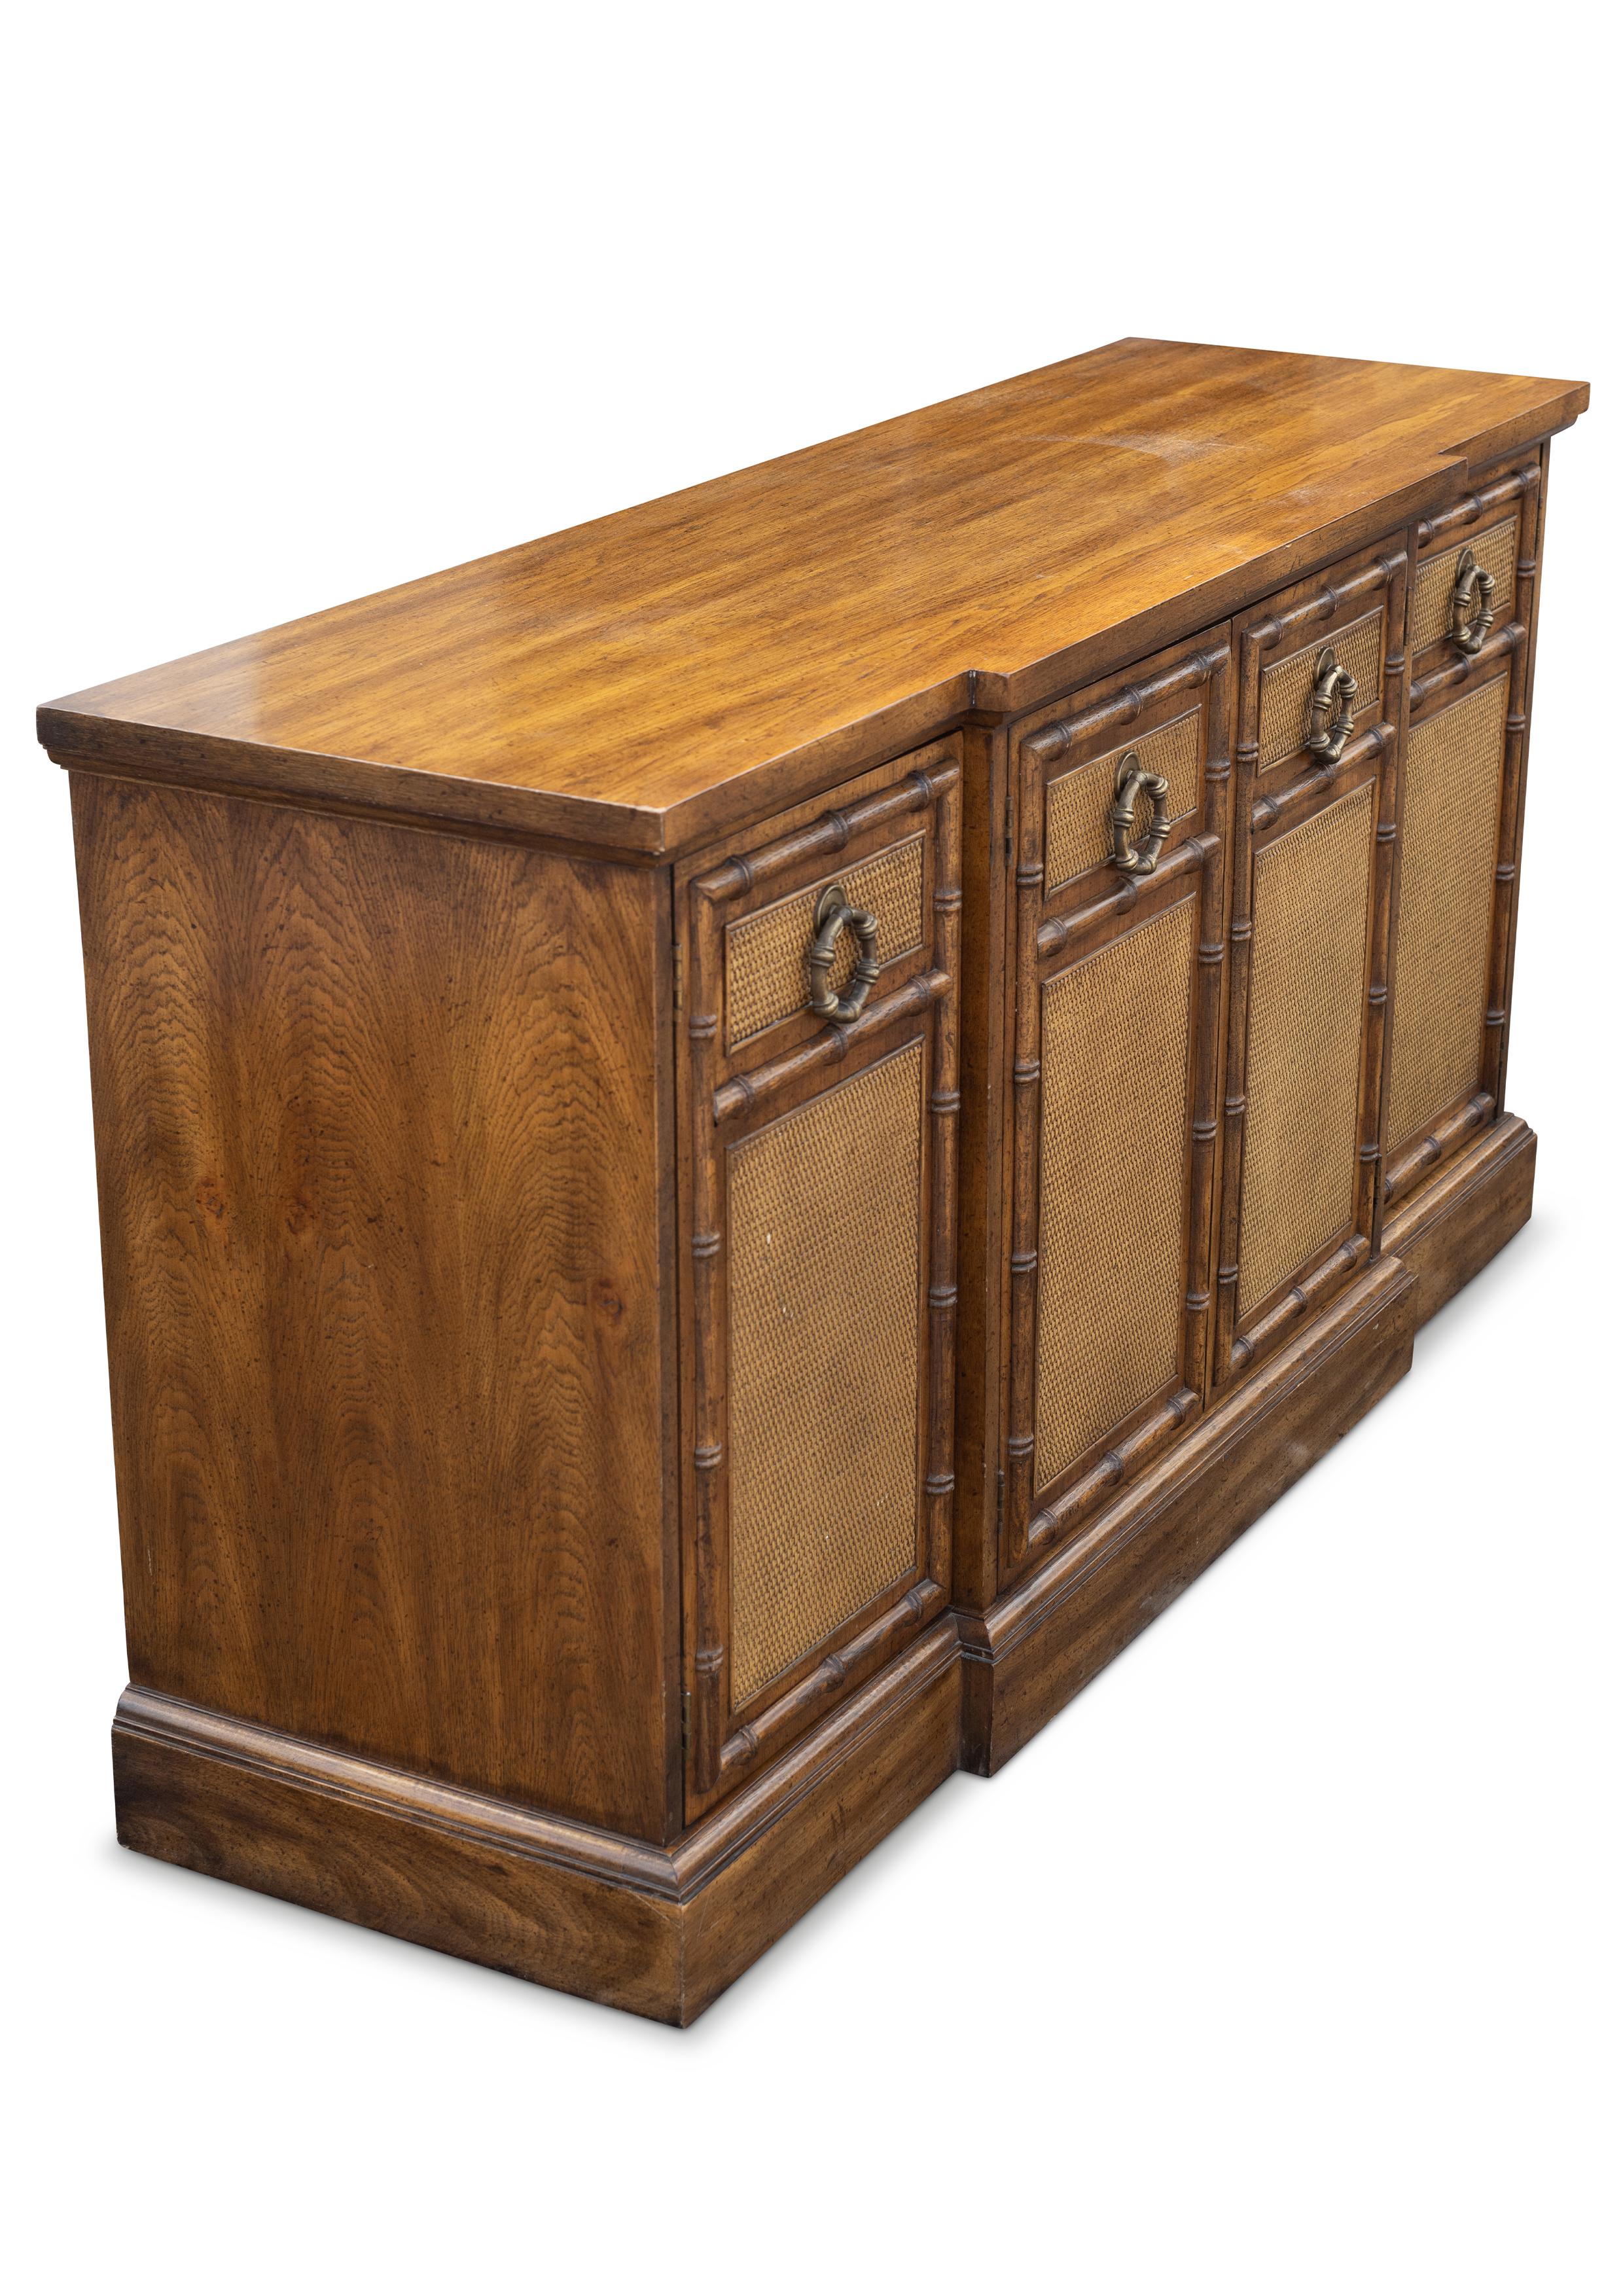 American of Martinsville Bergere and Faux Bamboo Sideboard With Cane sectional fronts and brass handles.

Founded in 1906, American of Martinsville was founded by Virginia tobacco producers and produces bedroom furniture. In the early 1920s the